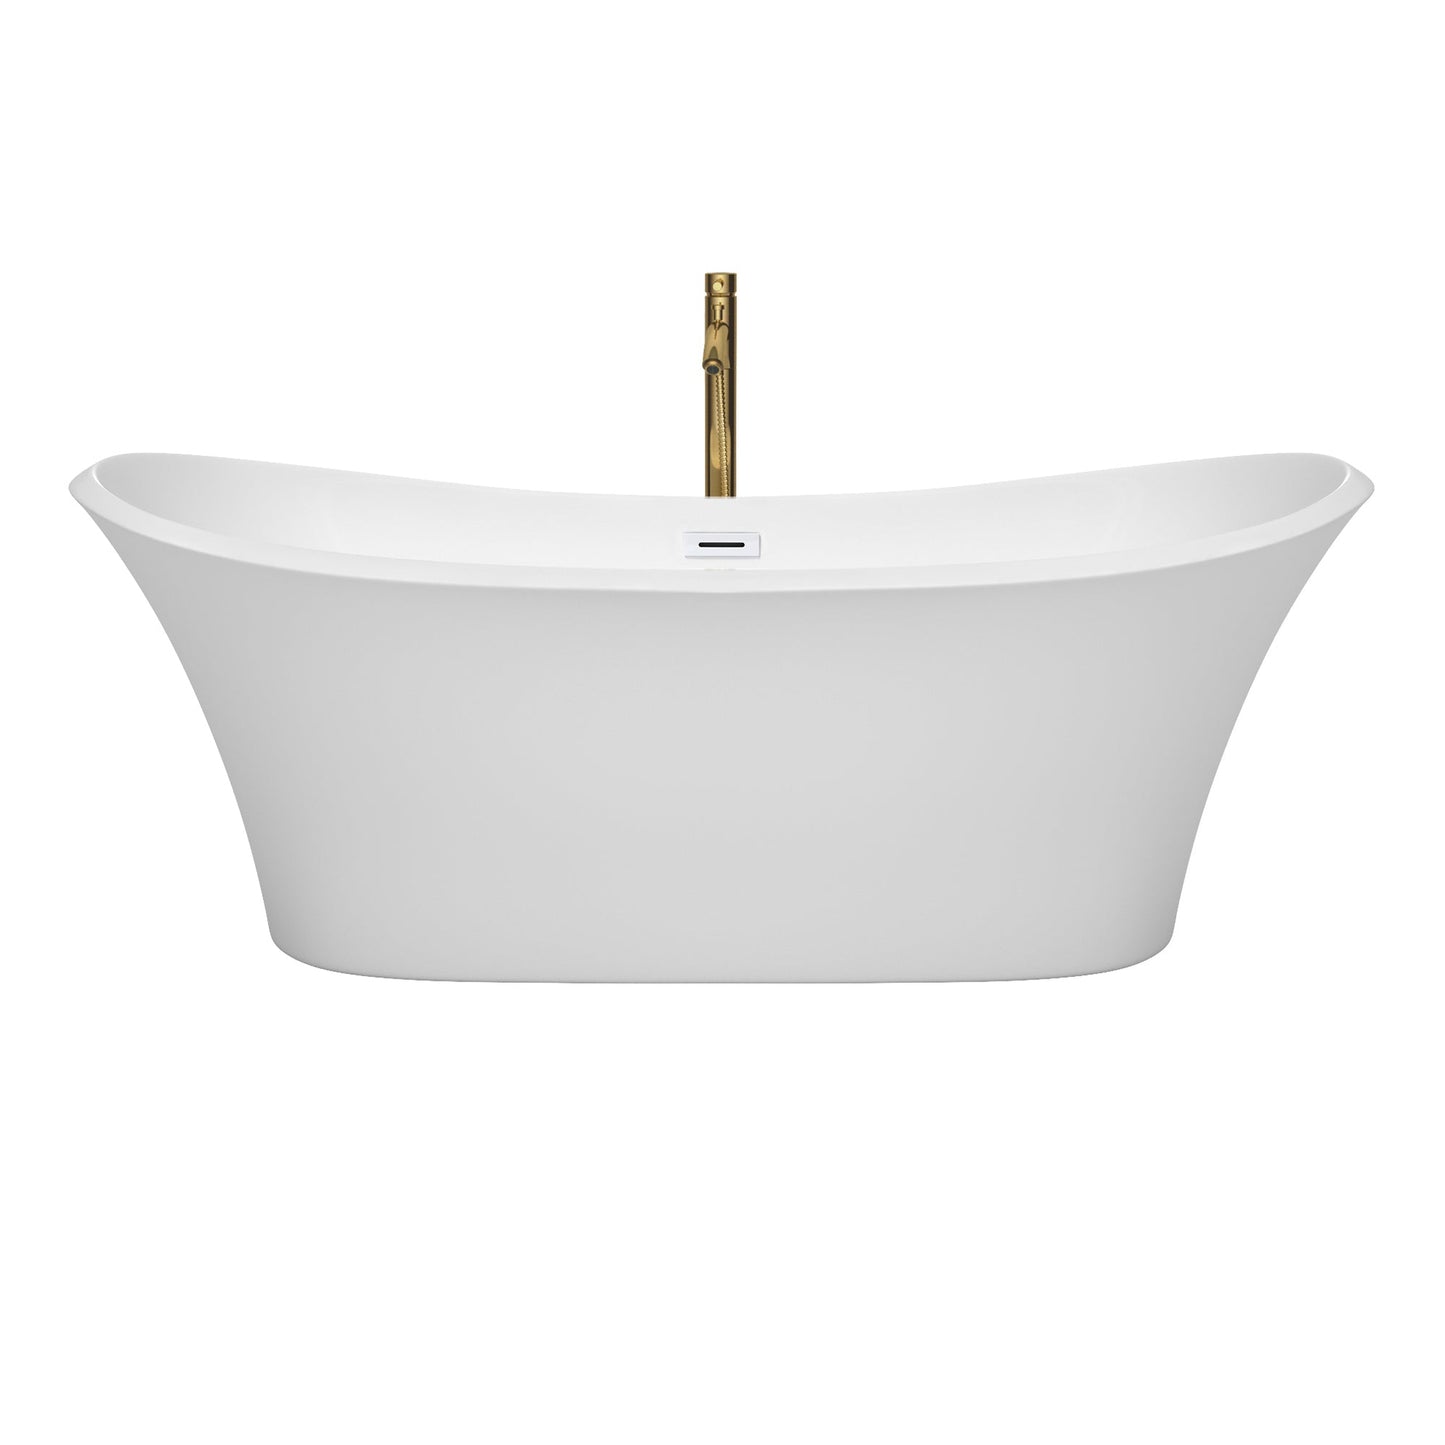 Wyndham Collection Bolera 71" Freestanding Bathtub in White With Shiny White Trim and Floor Mounted Faucet in Brushed Gold